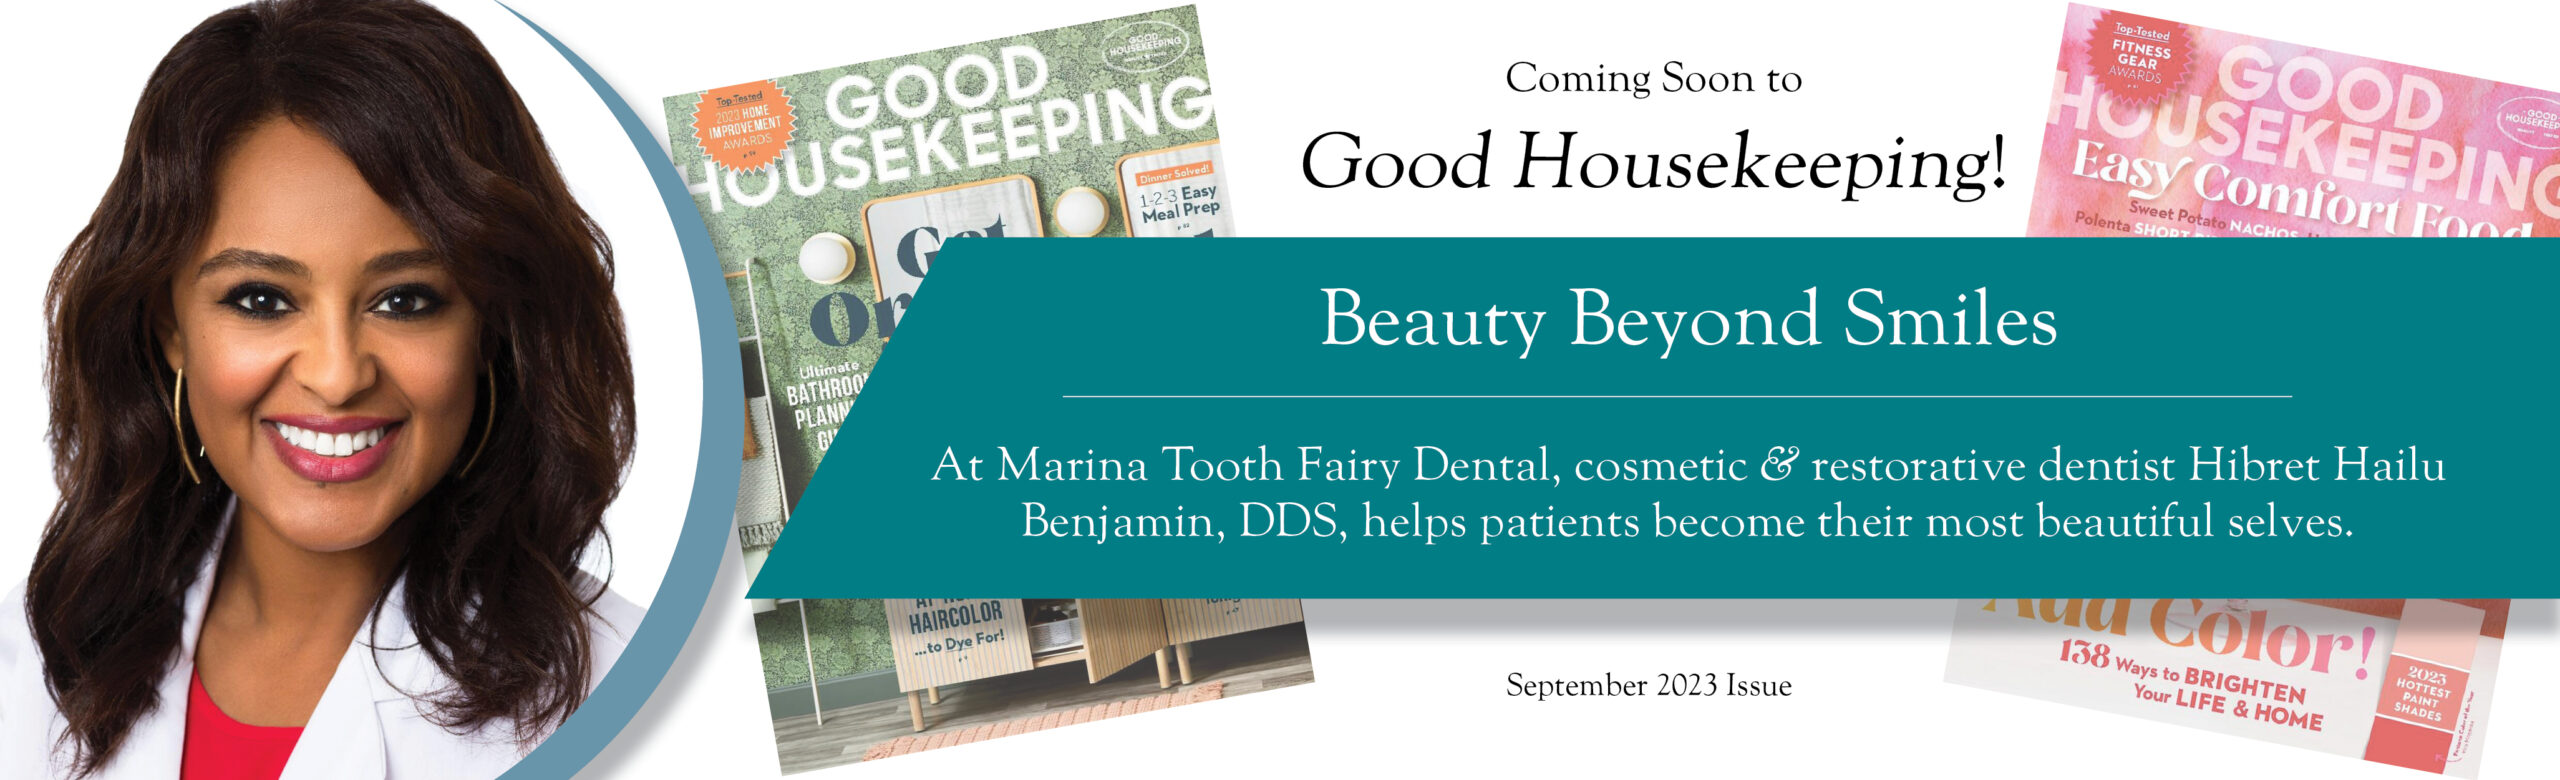 banner promoting upcoming article in Good Housekeeping magazine